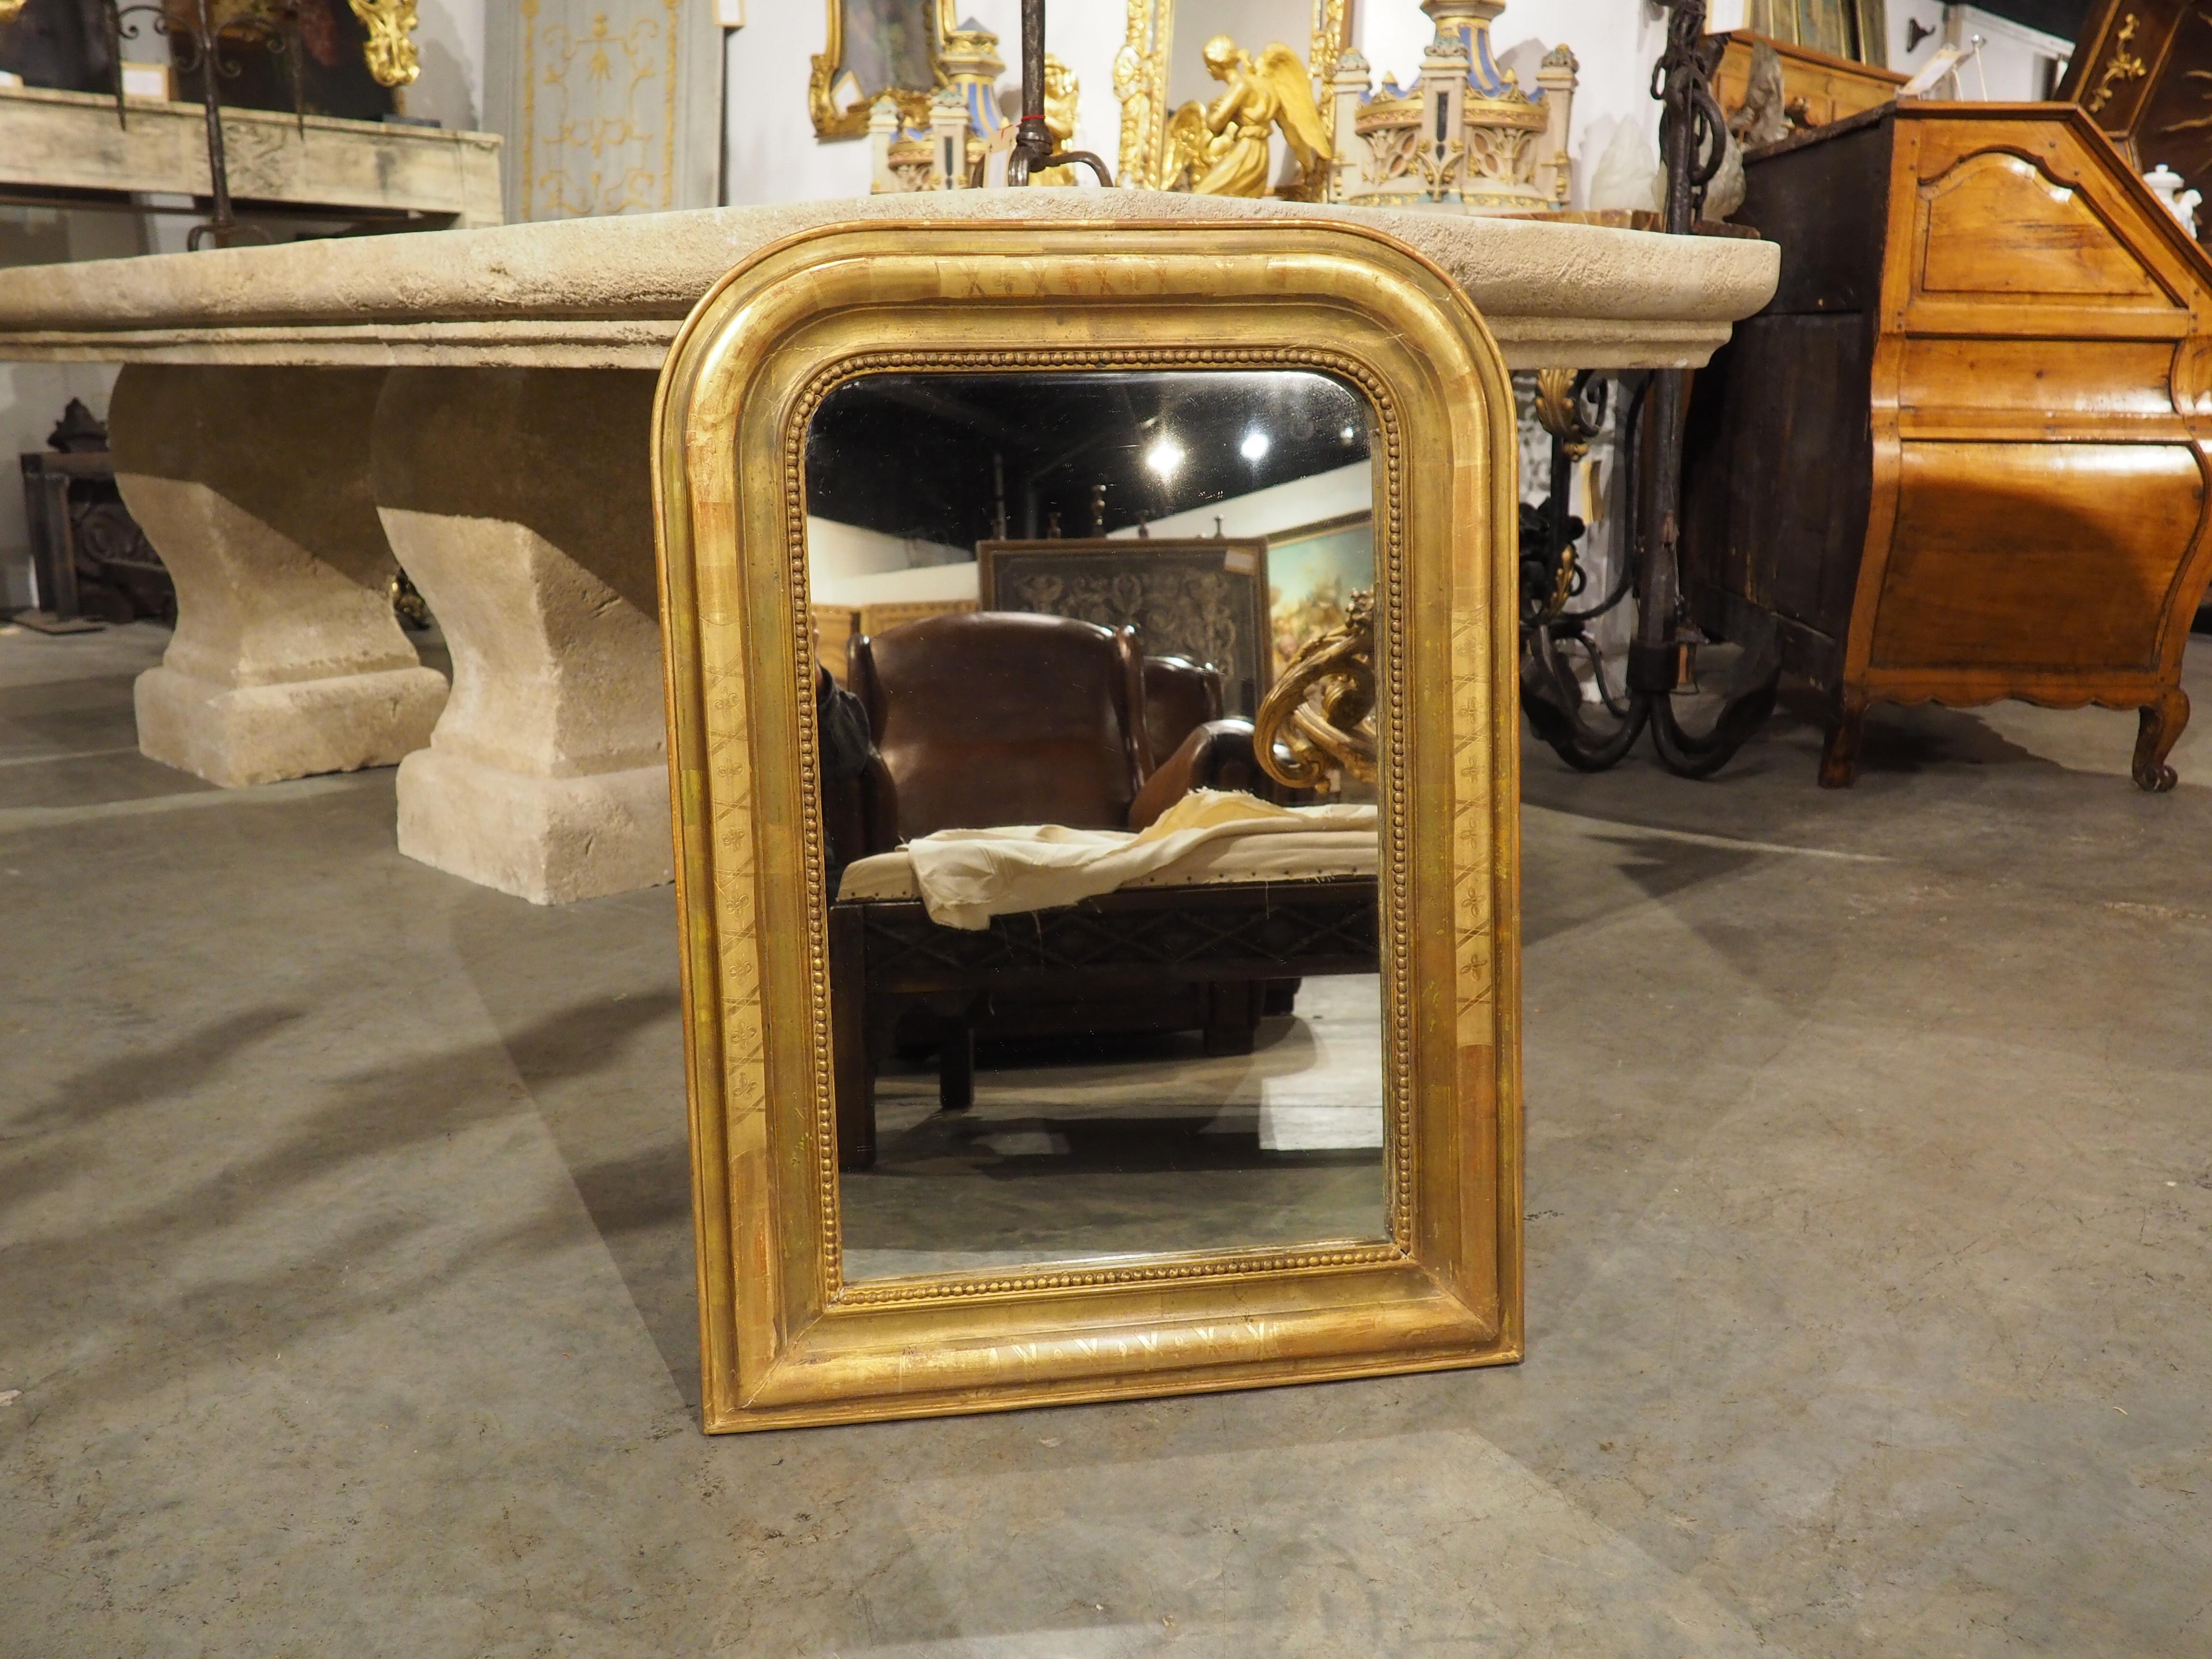 The clean lines and subtle embellishments of Louis Philippe-style mirrors make them highly sought after; they are elegant and versatile furnishings that can be paired with just about any interior design and color palette. This particular offering